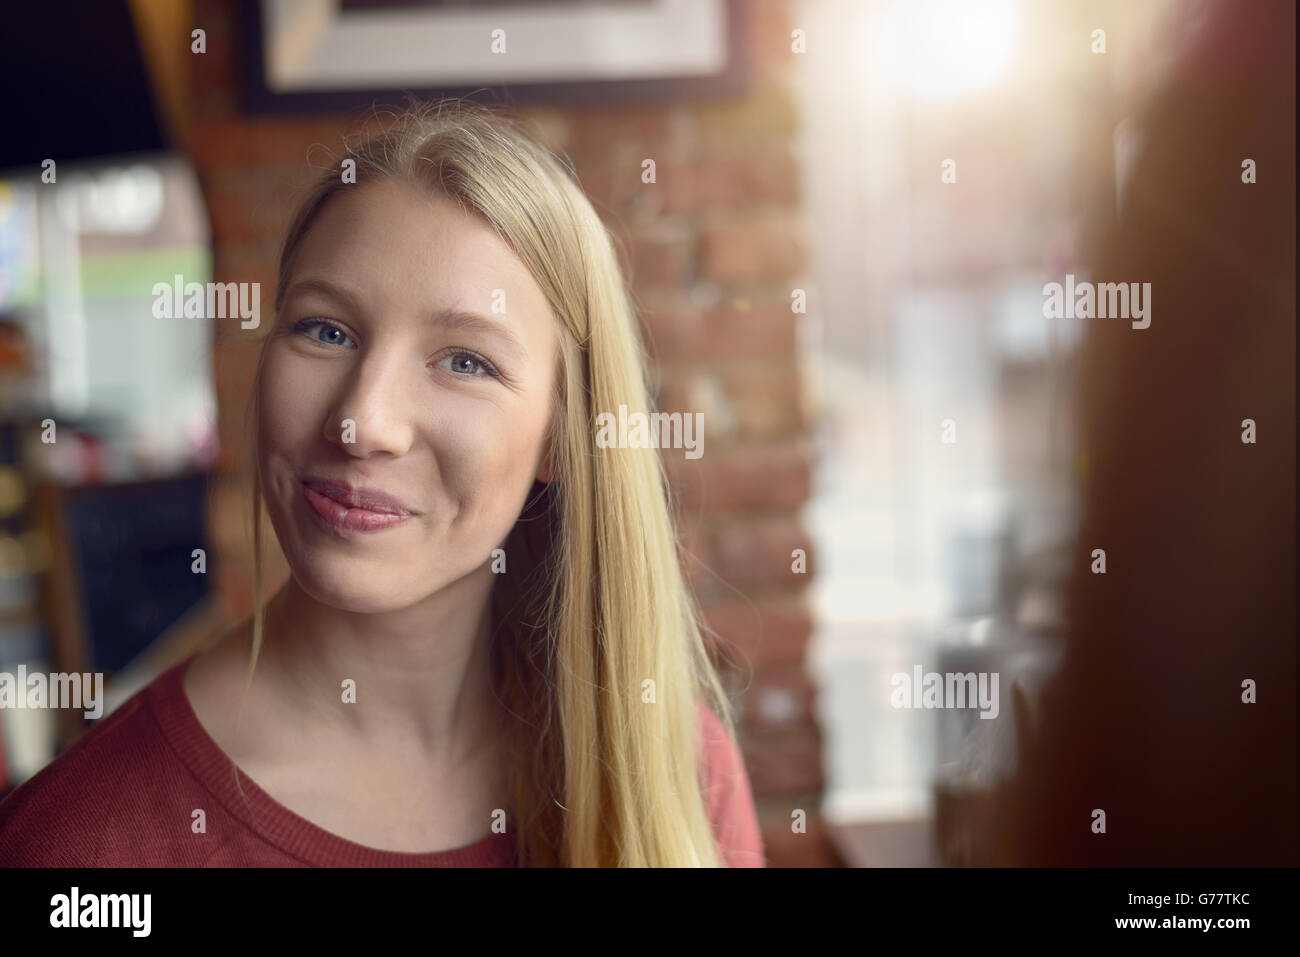 Smiling pretty young woman with long blond hair and an amused look gazing at the camera with a friendly smile inside a restauran Stock Photo